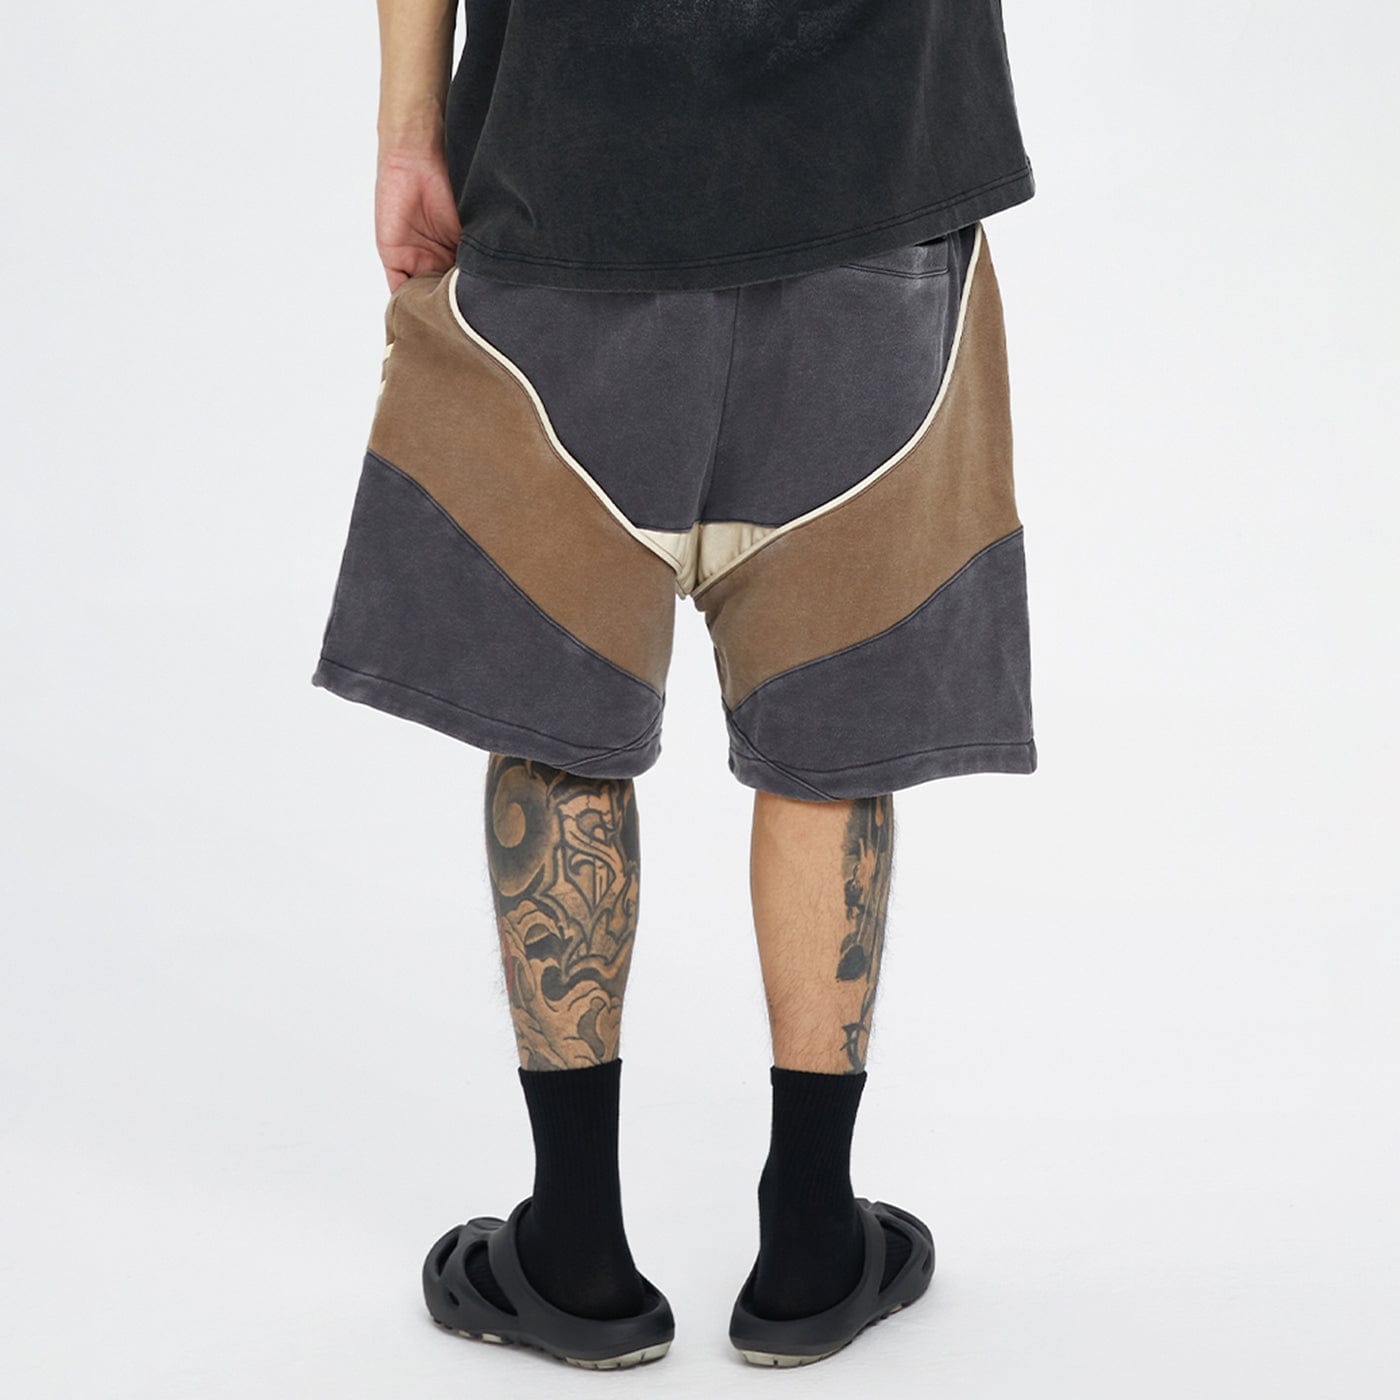 F2CE Deconstructed Multi-Paneled Shorts, premium urban and streetwear designers apparel on PROJECTISR.com, F2CE